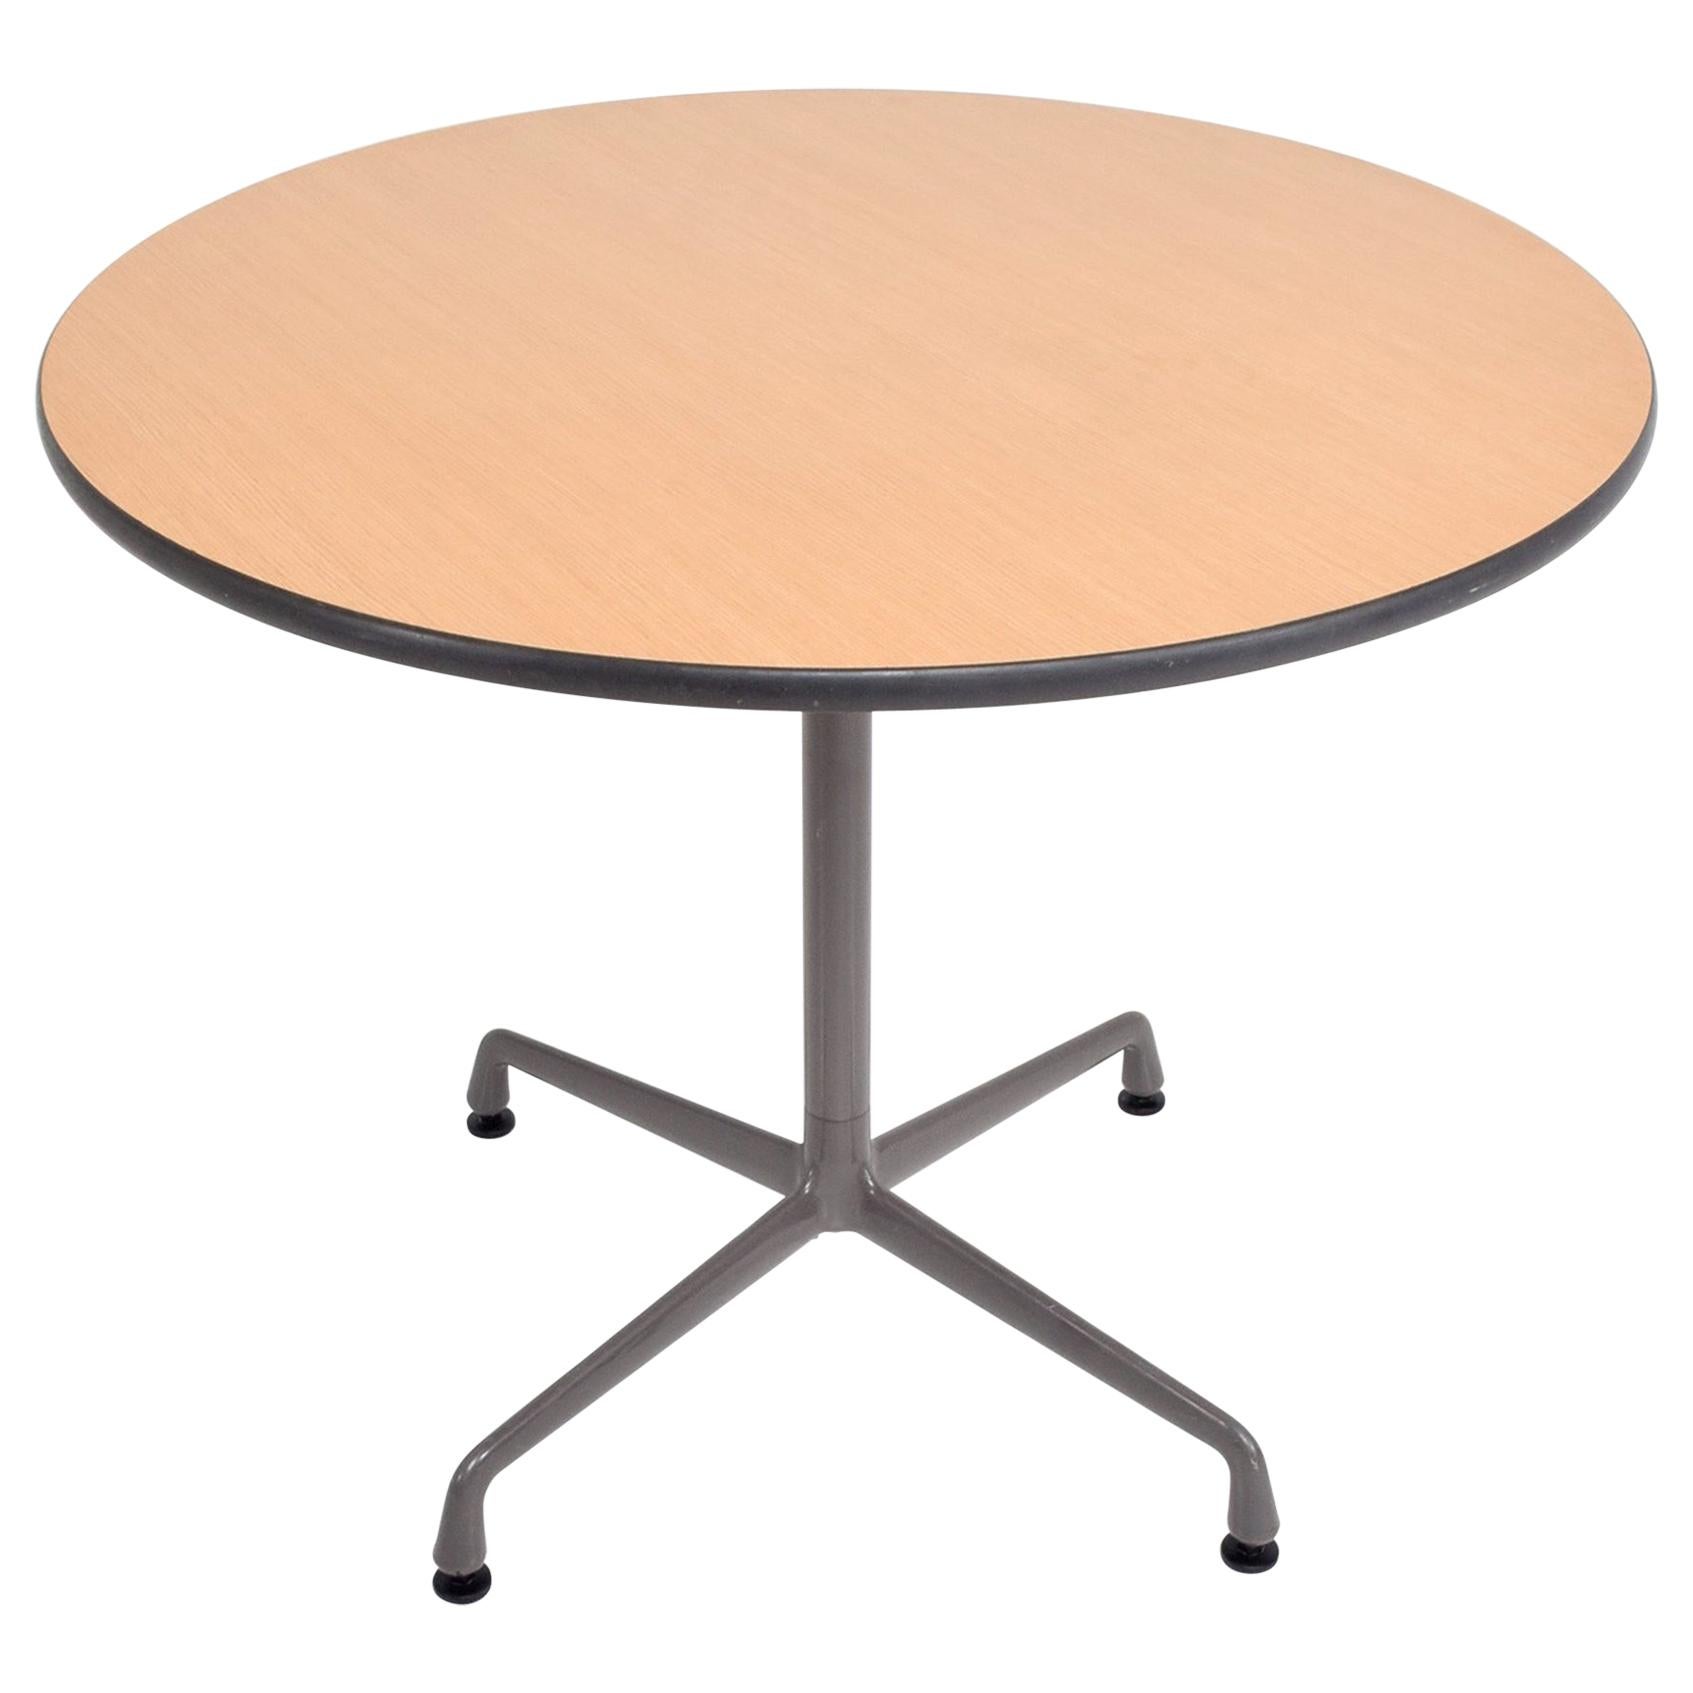 Charles Eames Aluminum Group Small Round Office Table Herman Miller 1960s